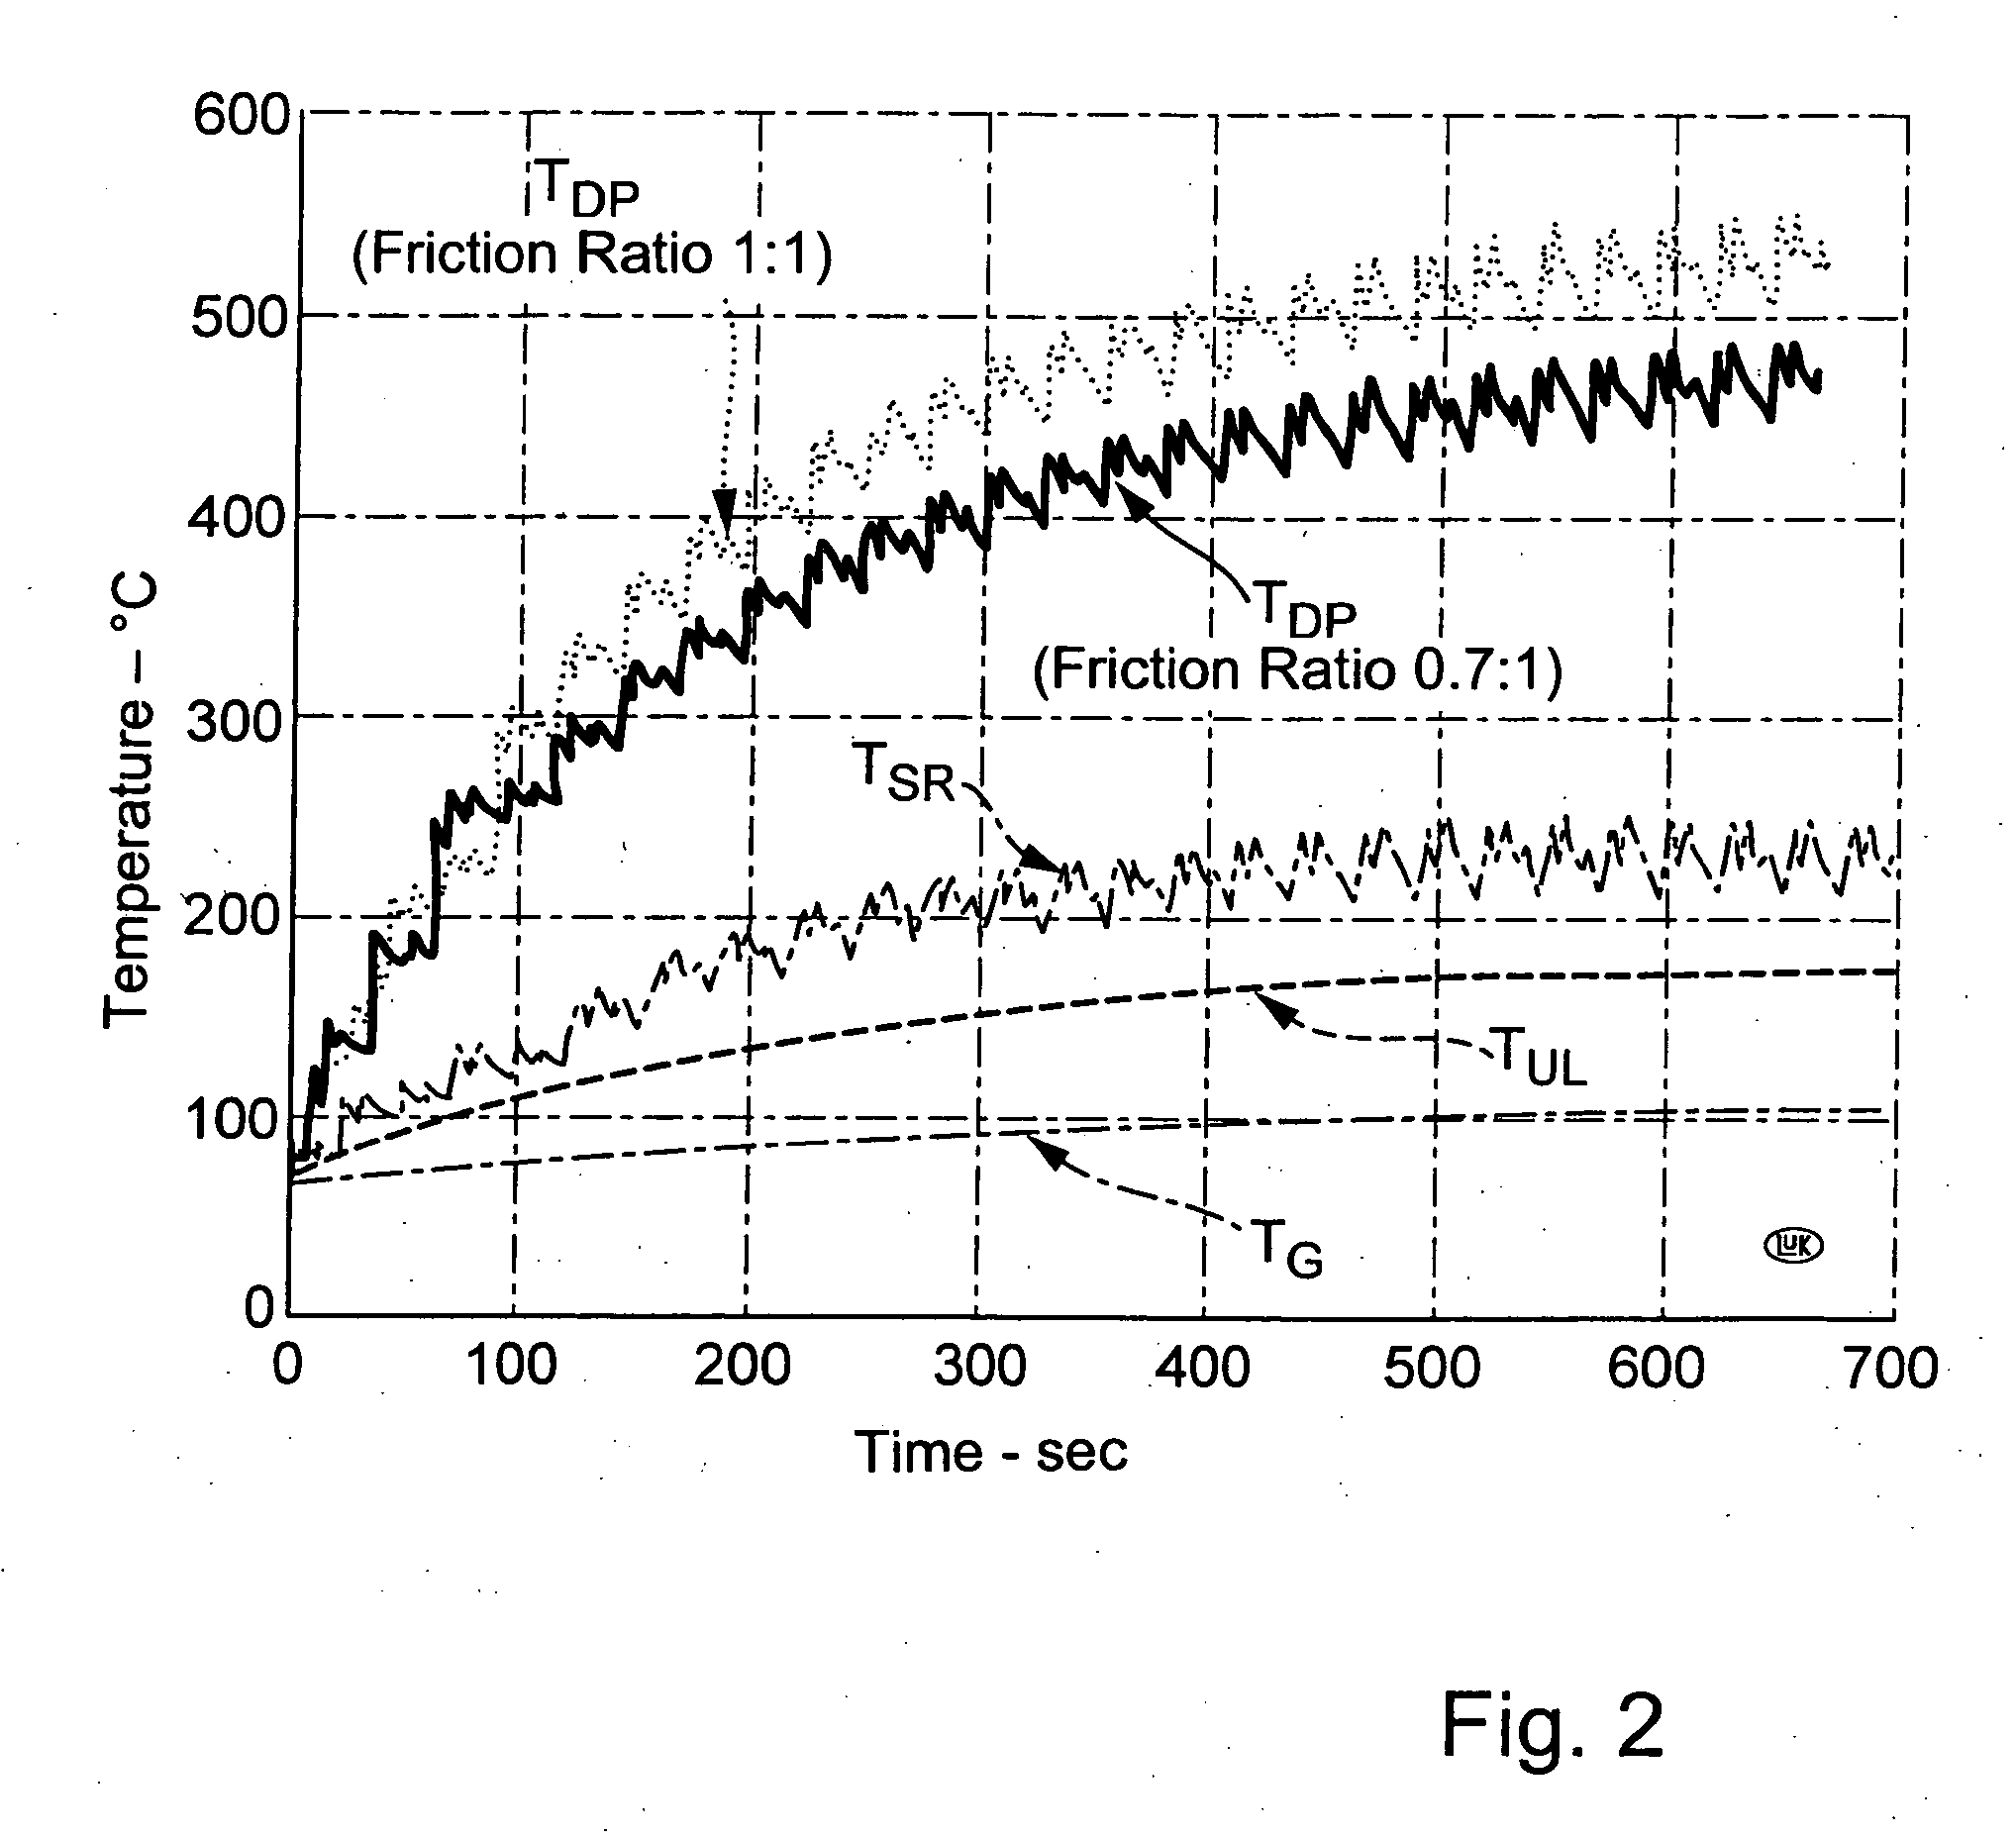 Method and system for cooling the clutch system of a transmission